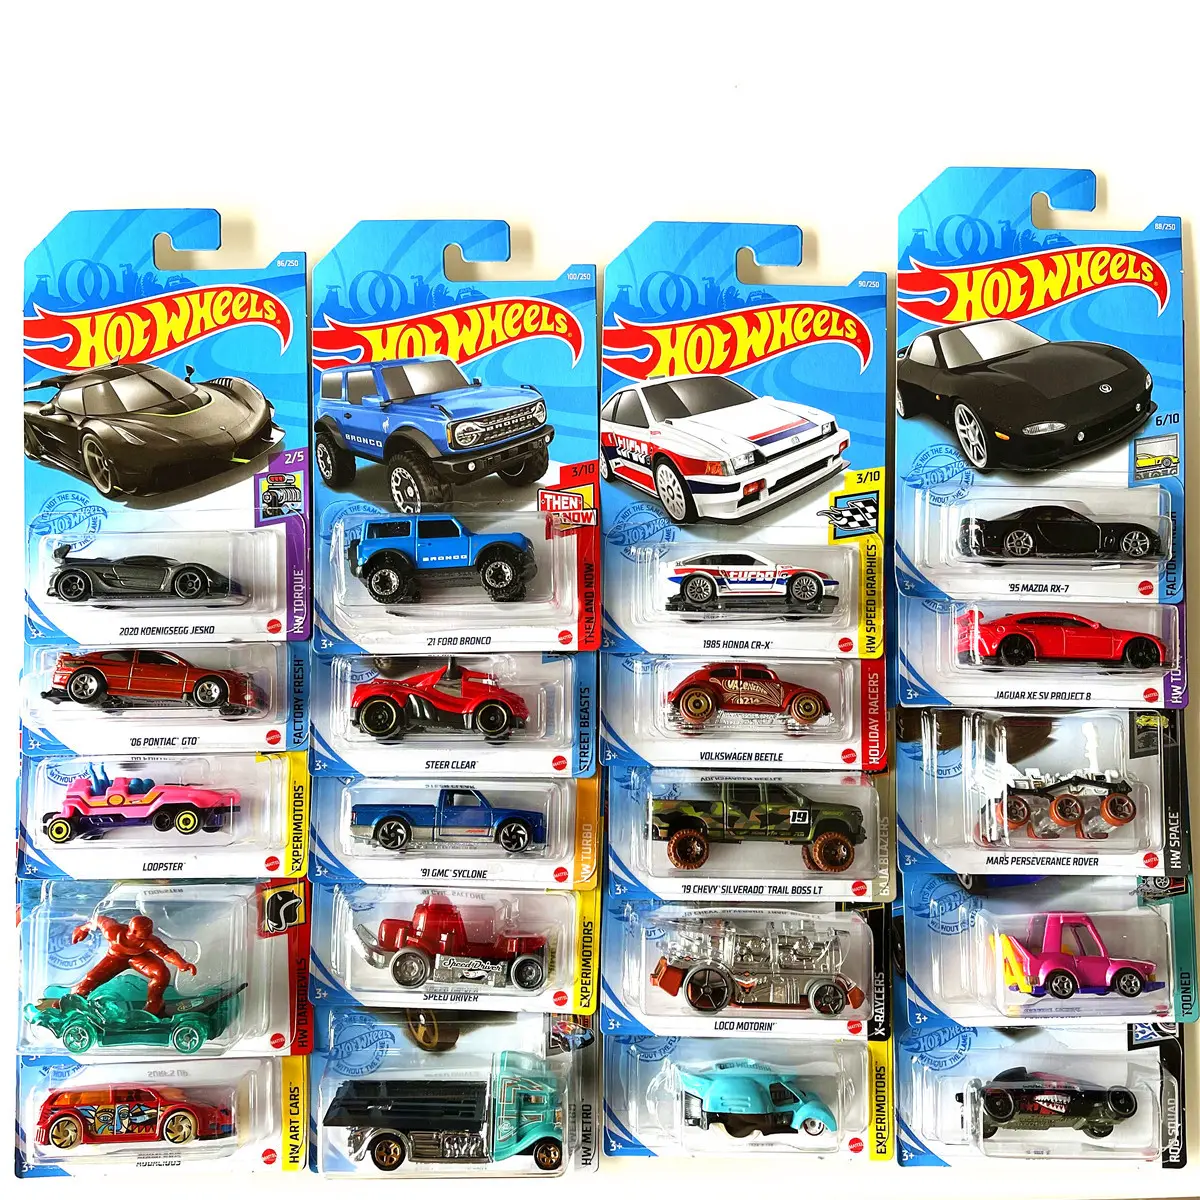 diecast car scale hobby models scale hot wheel diecast toy hotwheels cars toys model